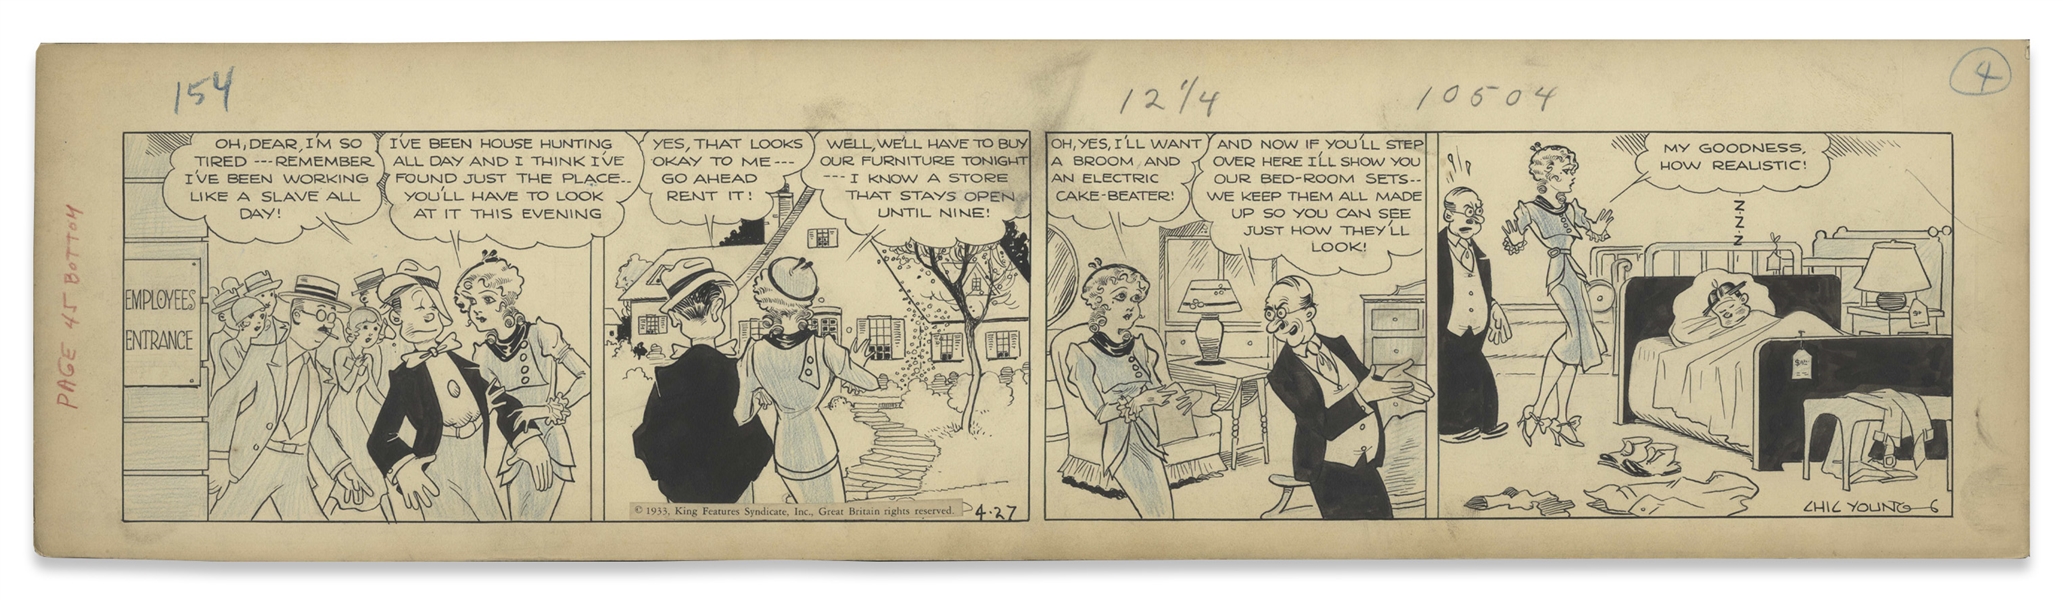 Chic Young Hand-Drawn ''Blondie'' Comic Strip From 1933 Titled ''A Satisfied Customer'' -- Blondie & Dagwood Buy Furniture for Their New Home, Including a Bed That Dagwood Tests Out